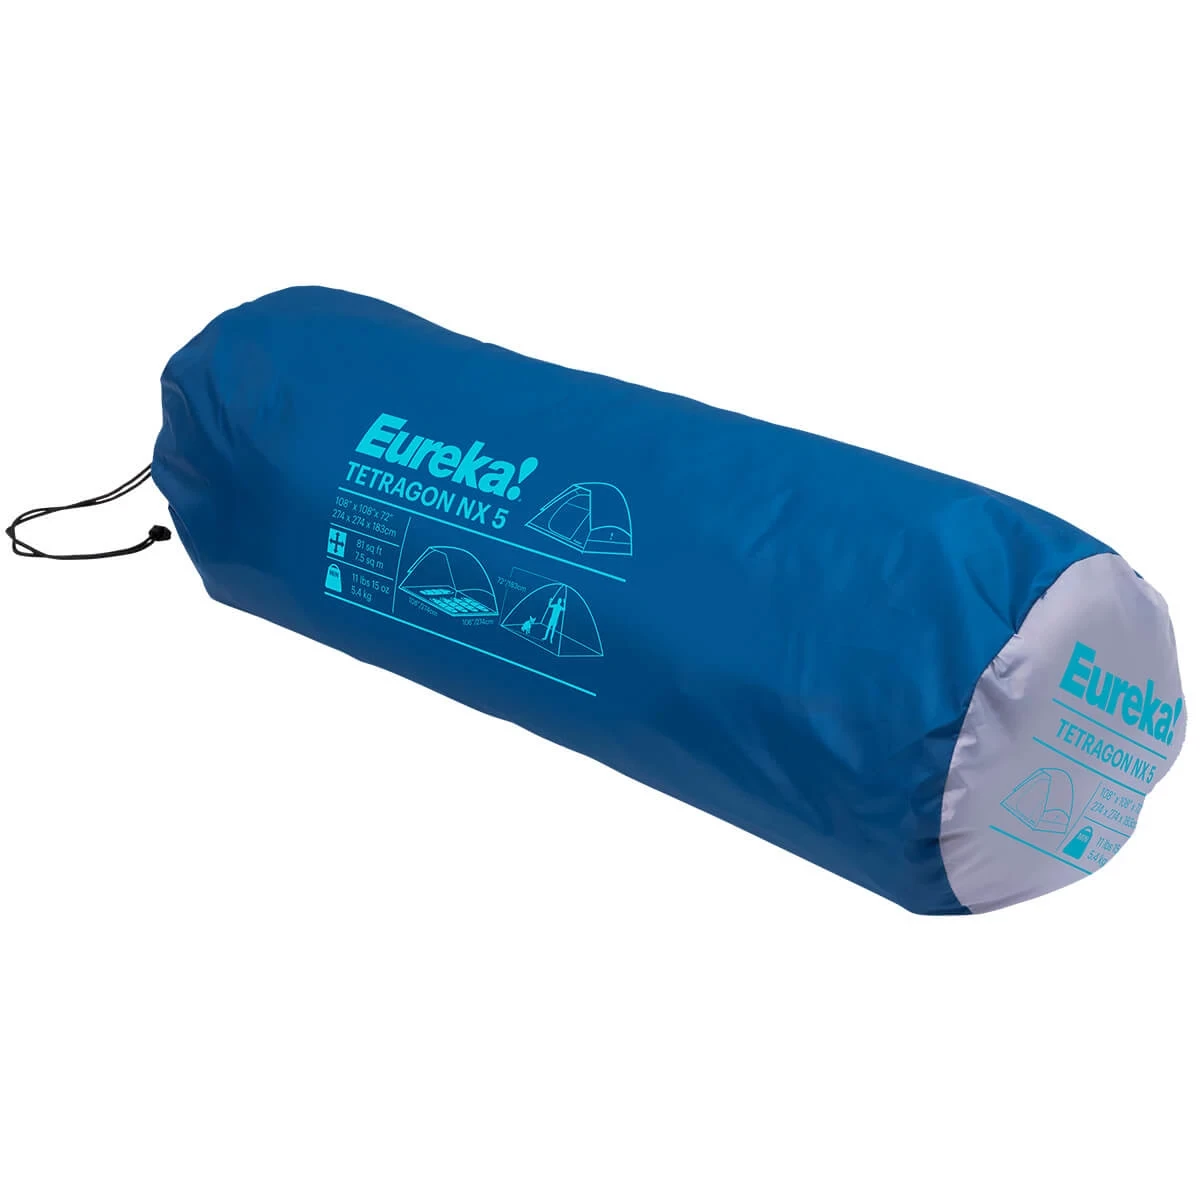 Packed Tetragon NX 5 tent in carry bag